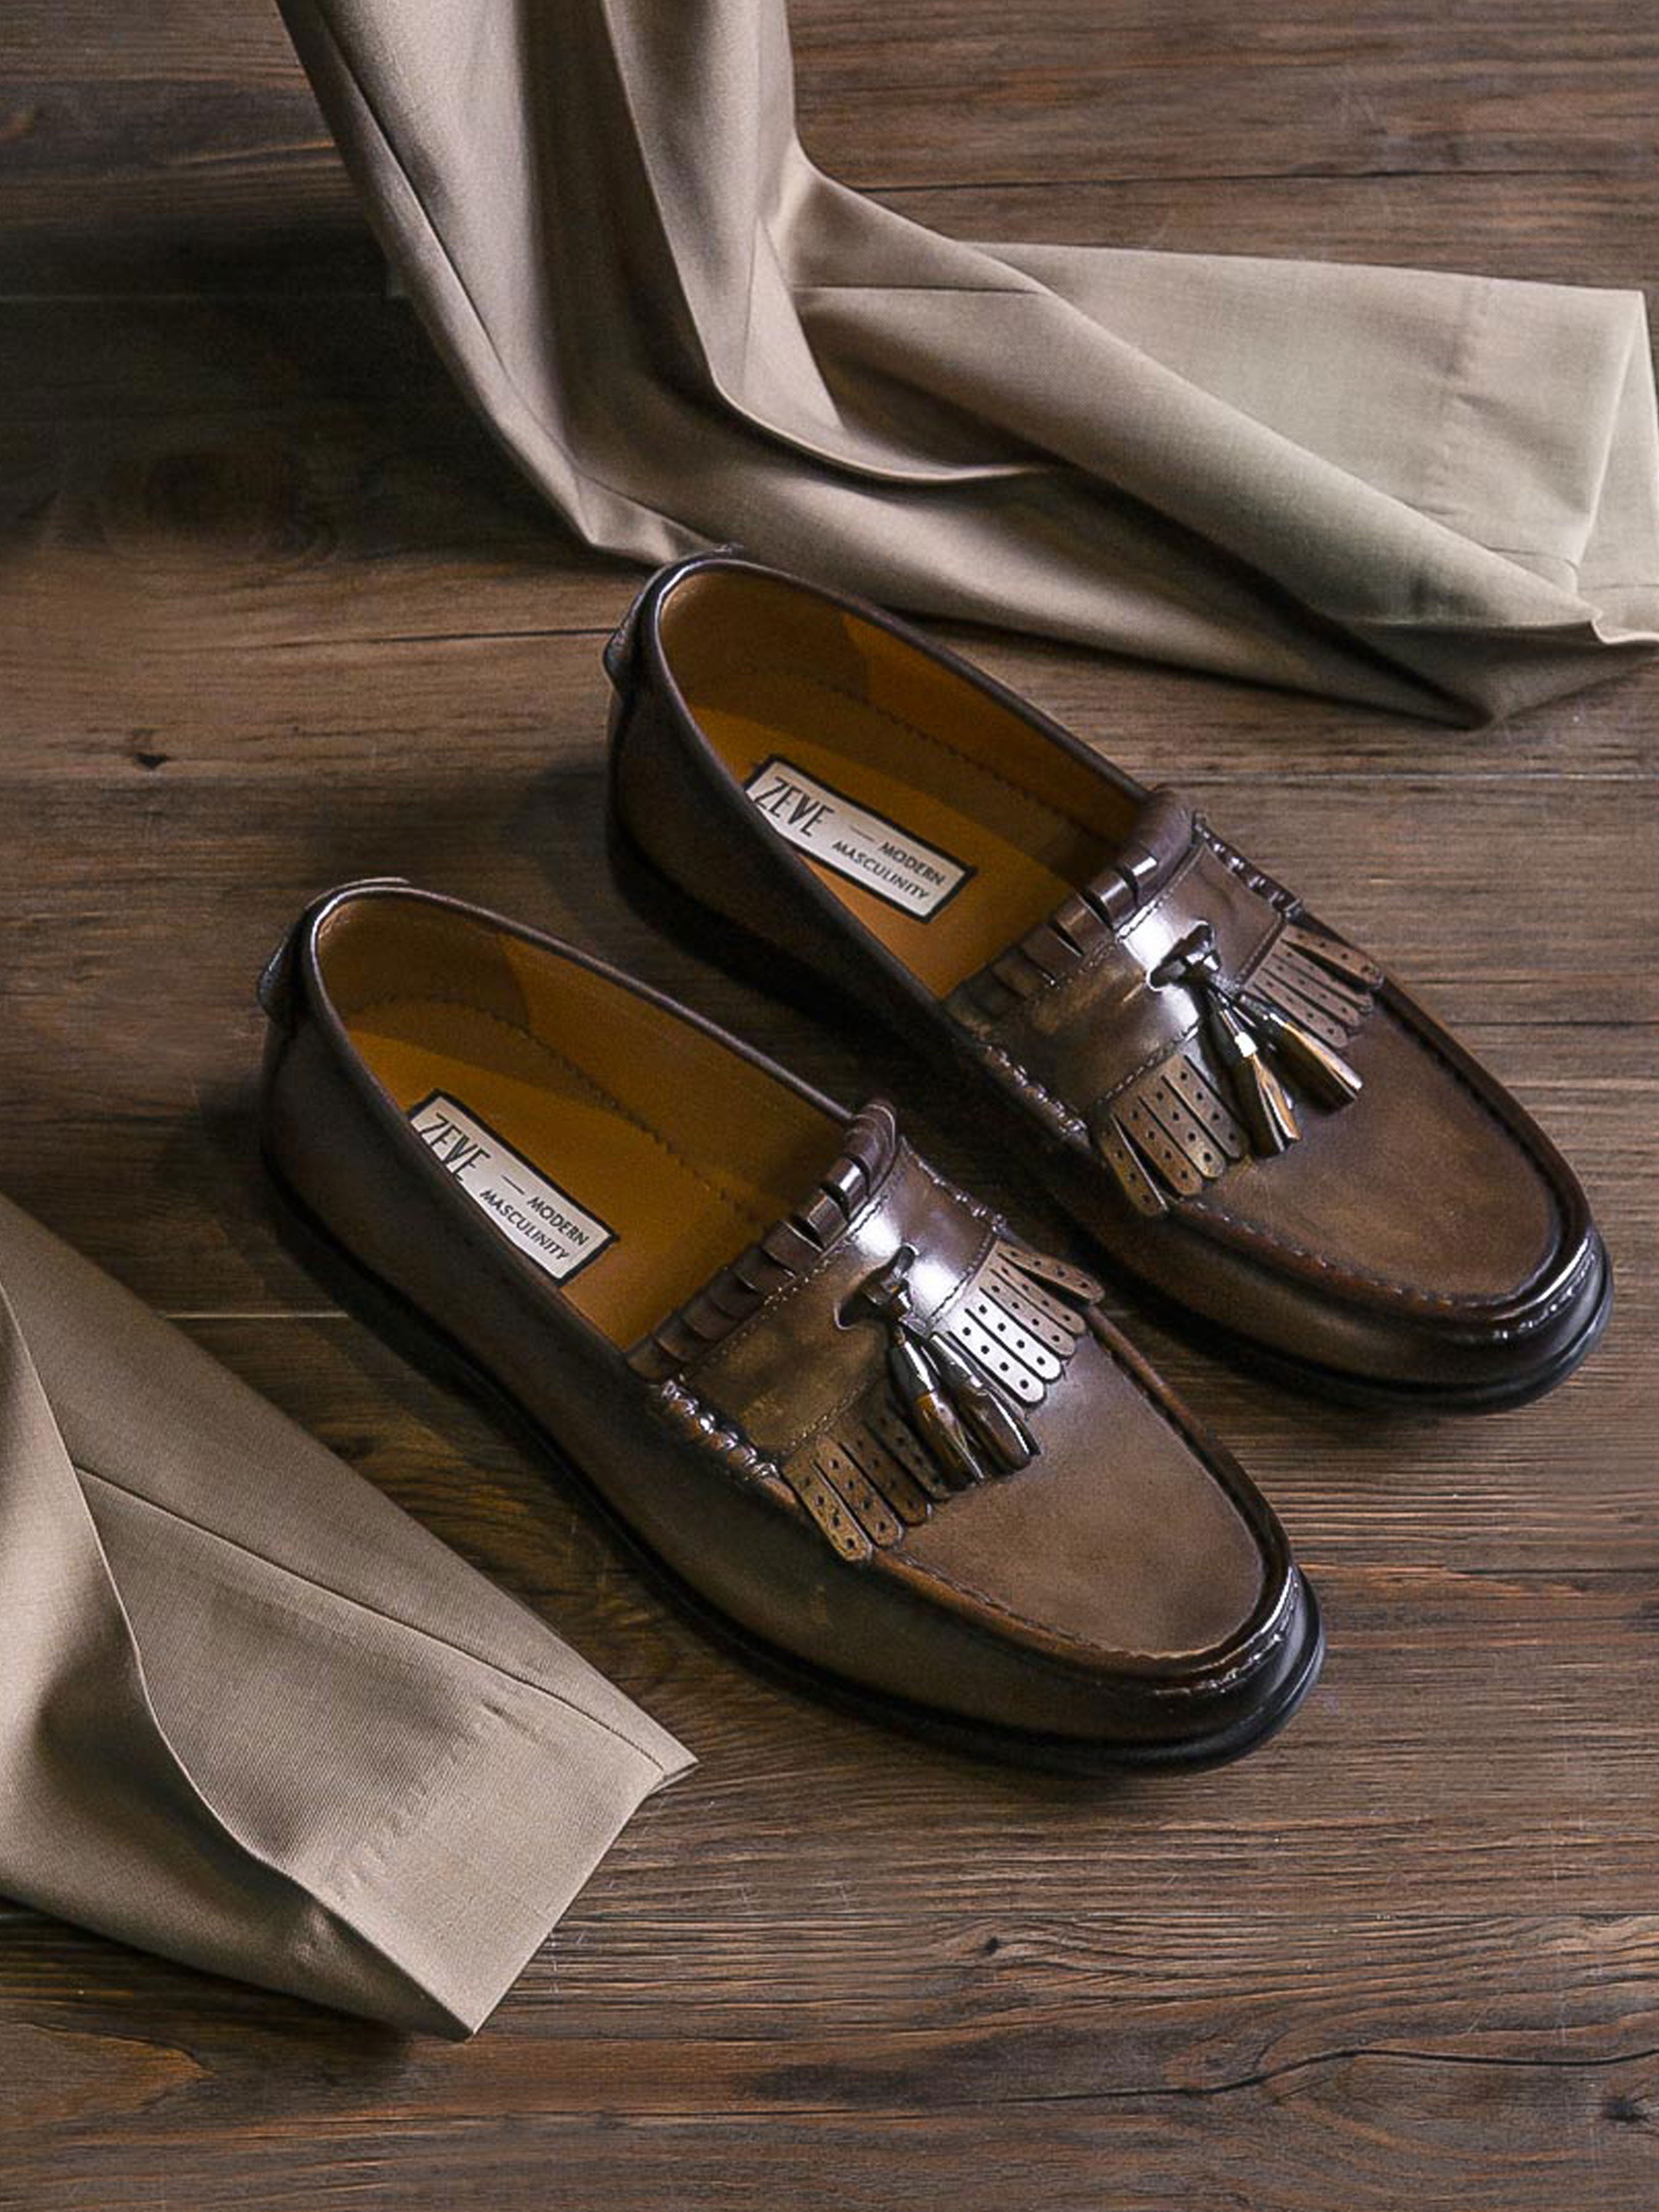 Fringe Classic Loafer - Khakis with Tassel (Hand Painted Patina) - Zeve Shoes